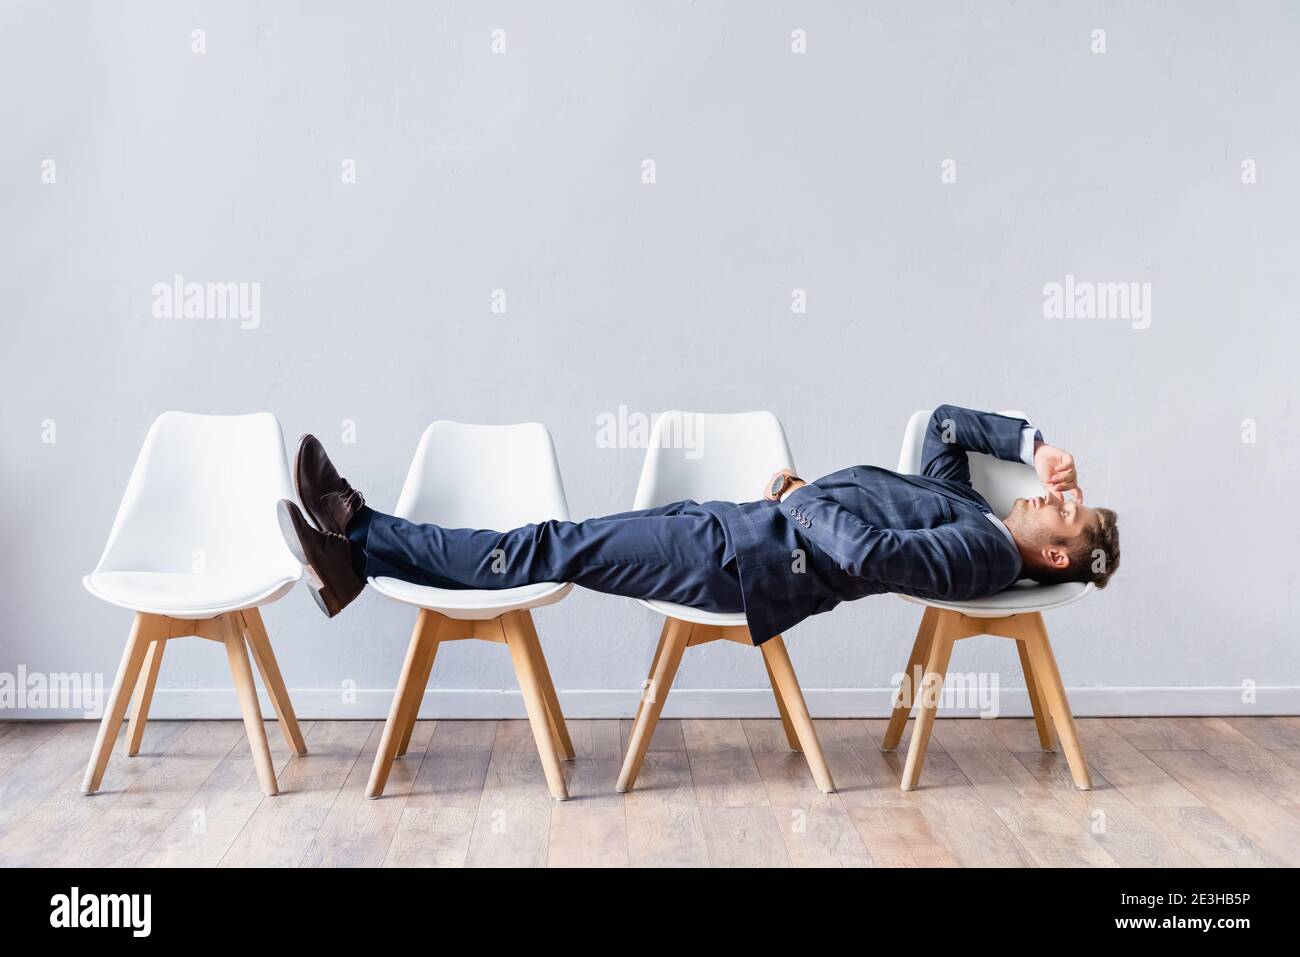 Businessman in suit lying on chairs while waiting job interview Stock Photo